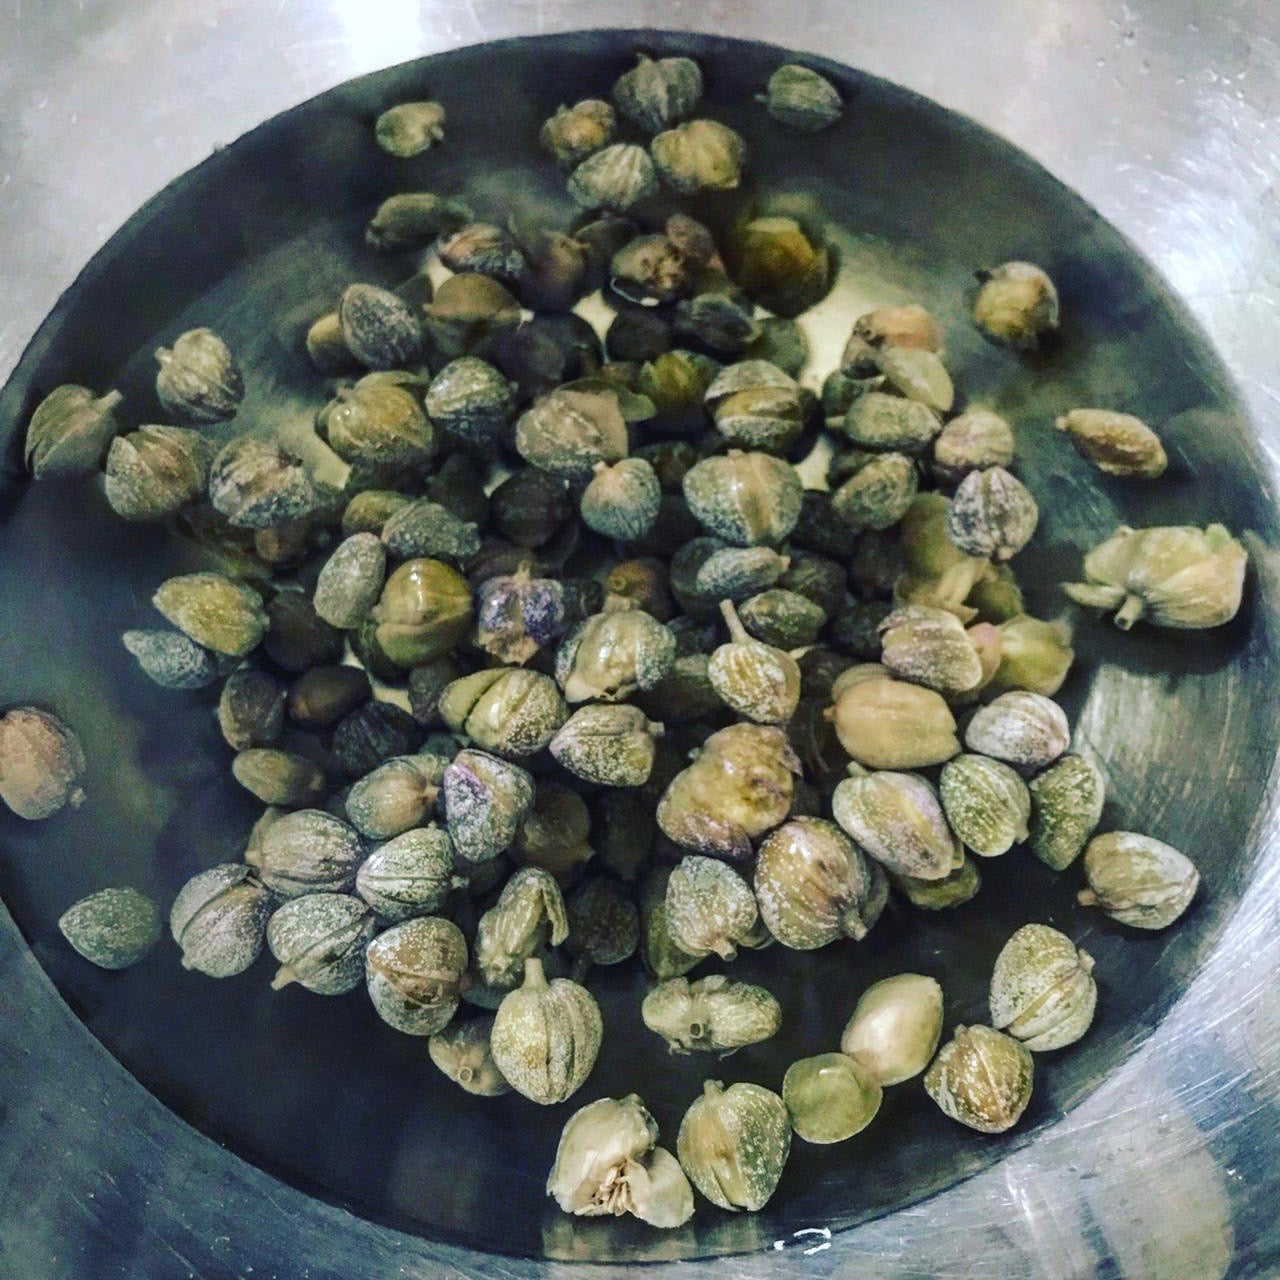 Small Salina Capers in Salt (250g)